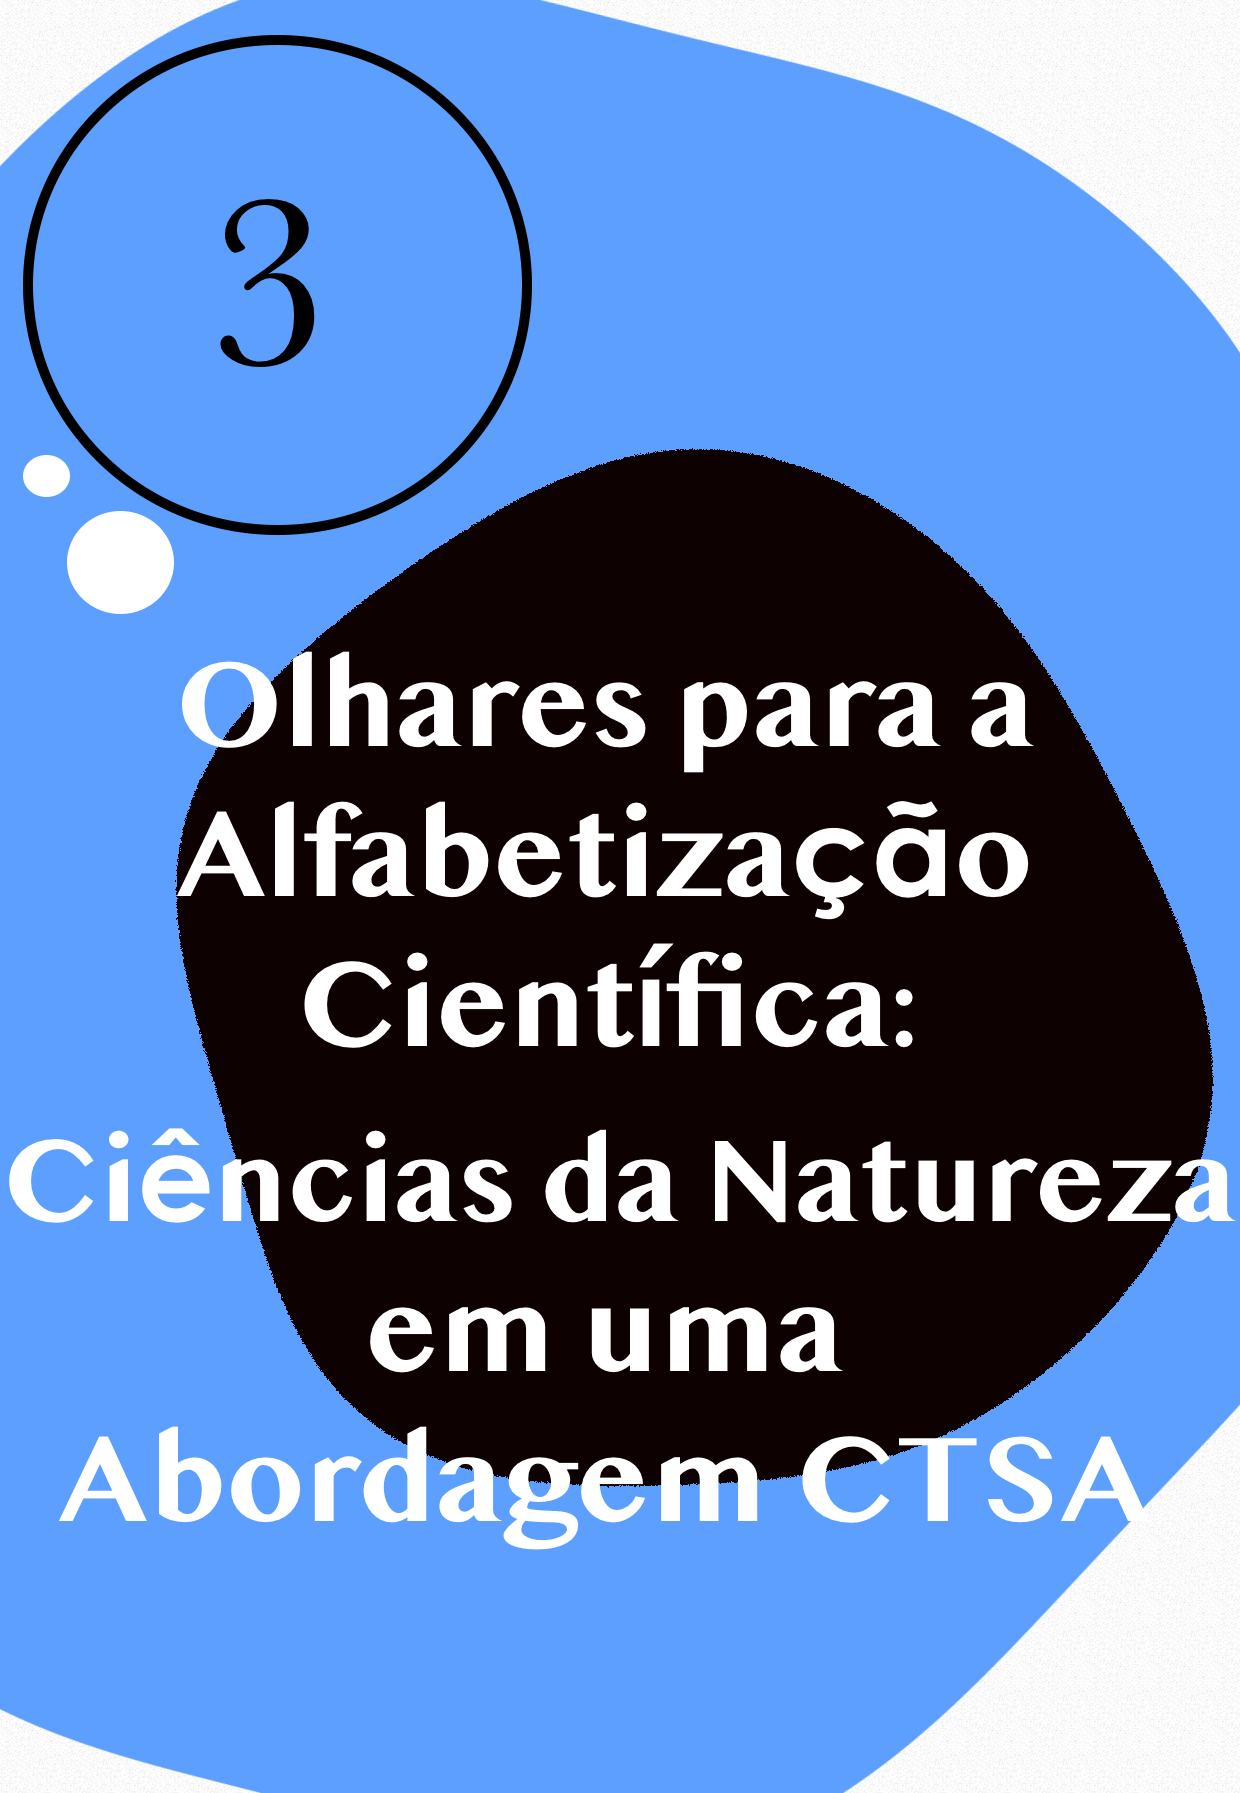 olhares_cientifica.png